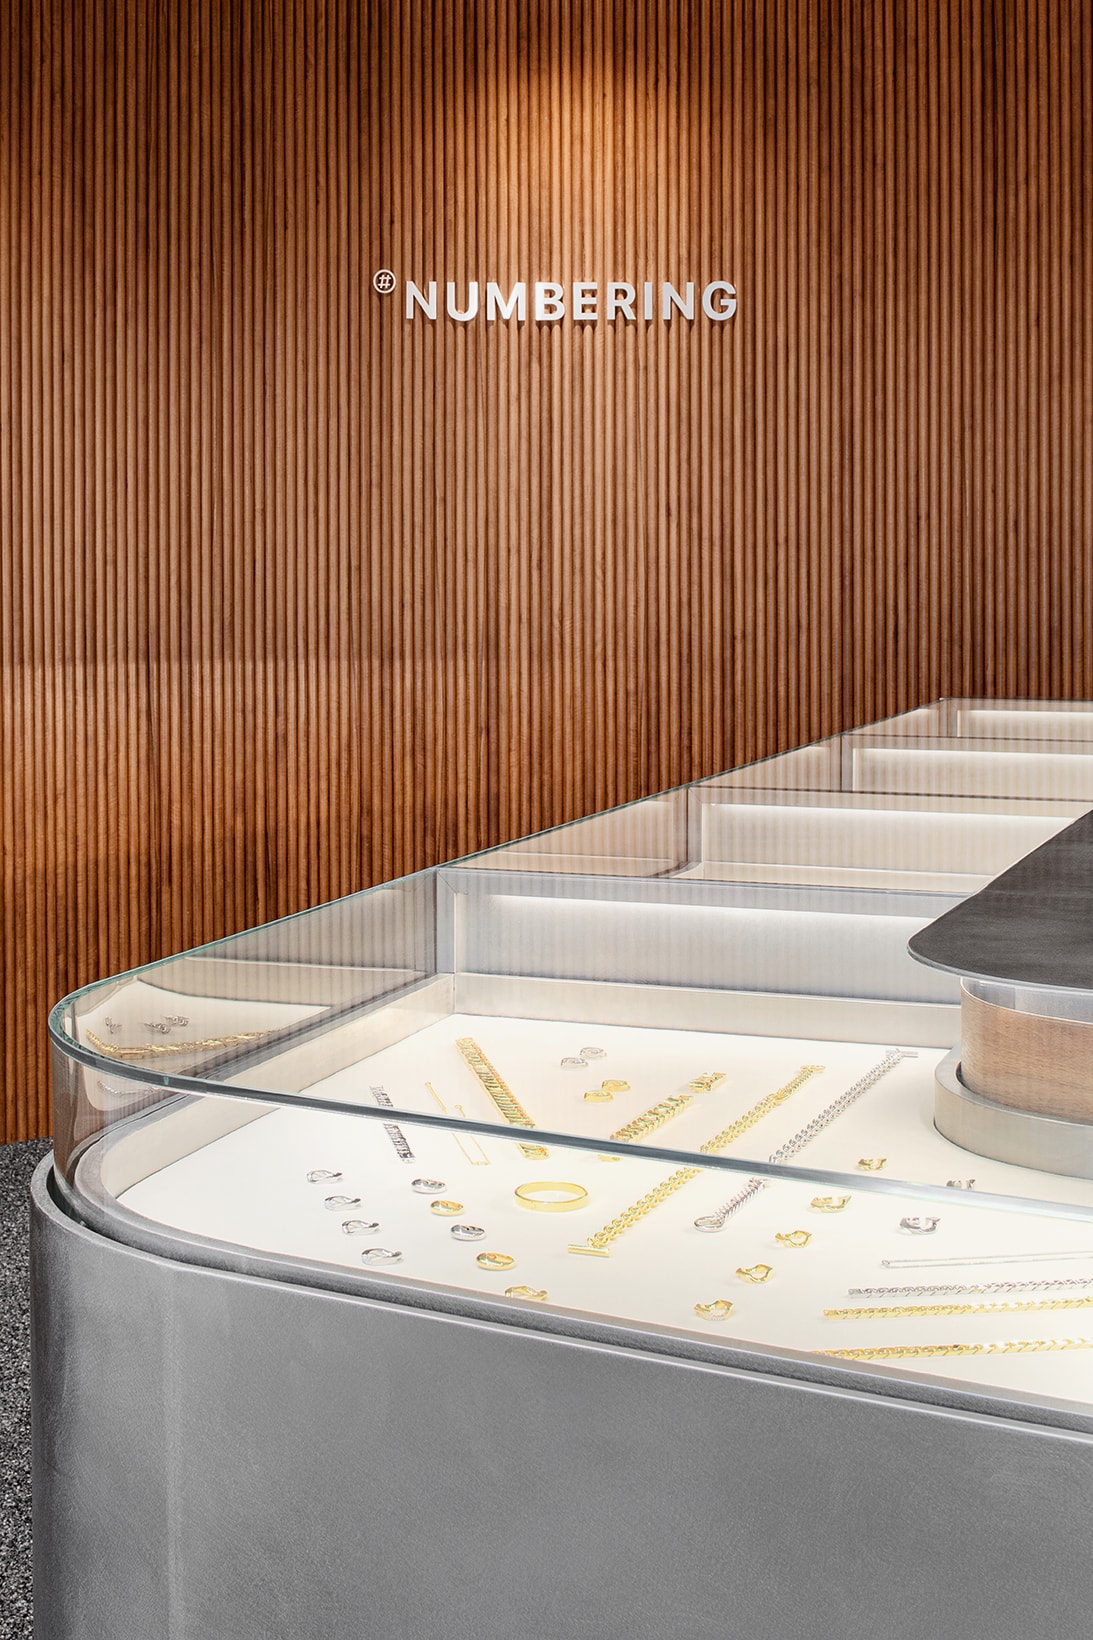 numbering jewelry gangnam seoul south korea flagship store retail opening